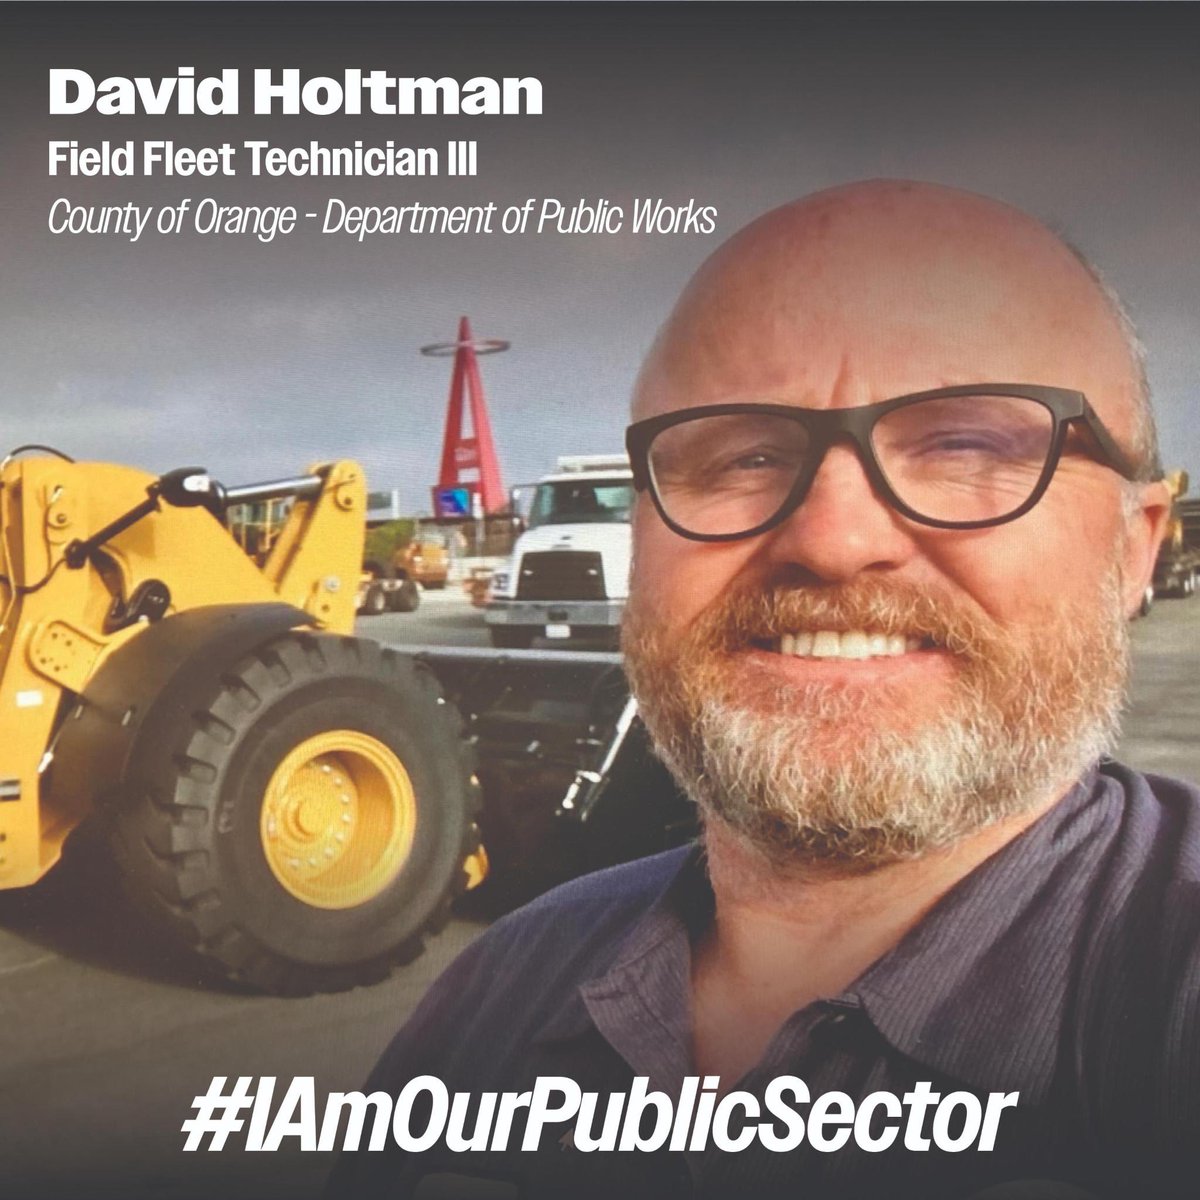 An investment in service providers like David Holtman is an investment in our collective welfare

Public works, parks & recs, waste & recycling rely on what he does

Public sector workers equipped to do their jobs make our communities safer & healthier

#PS #WeNeedOurPublicSector